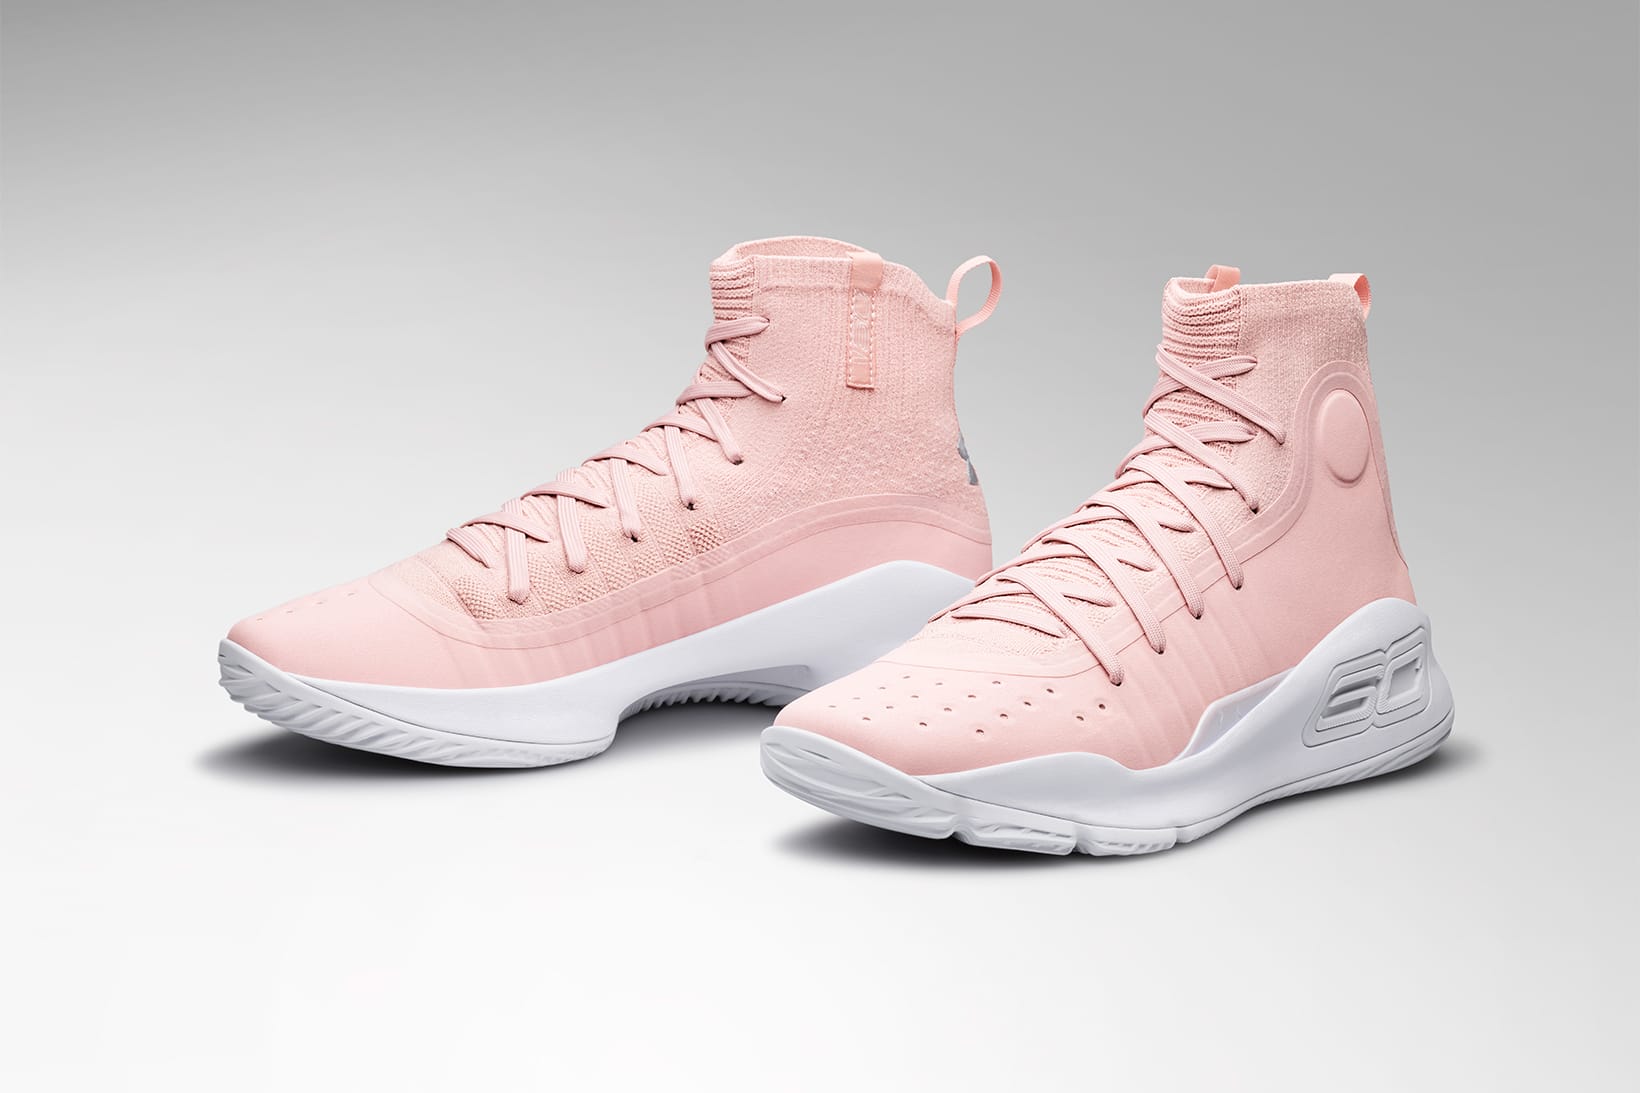 Under Armour Curry 4 Flushed Pink for 